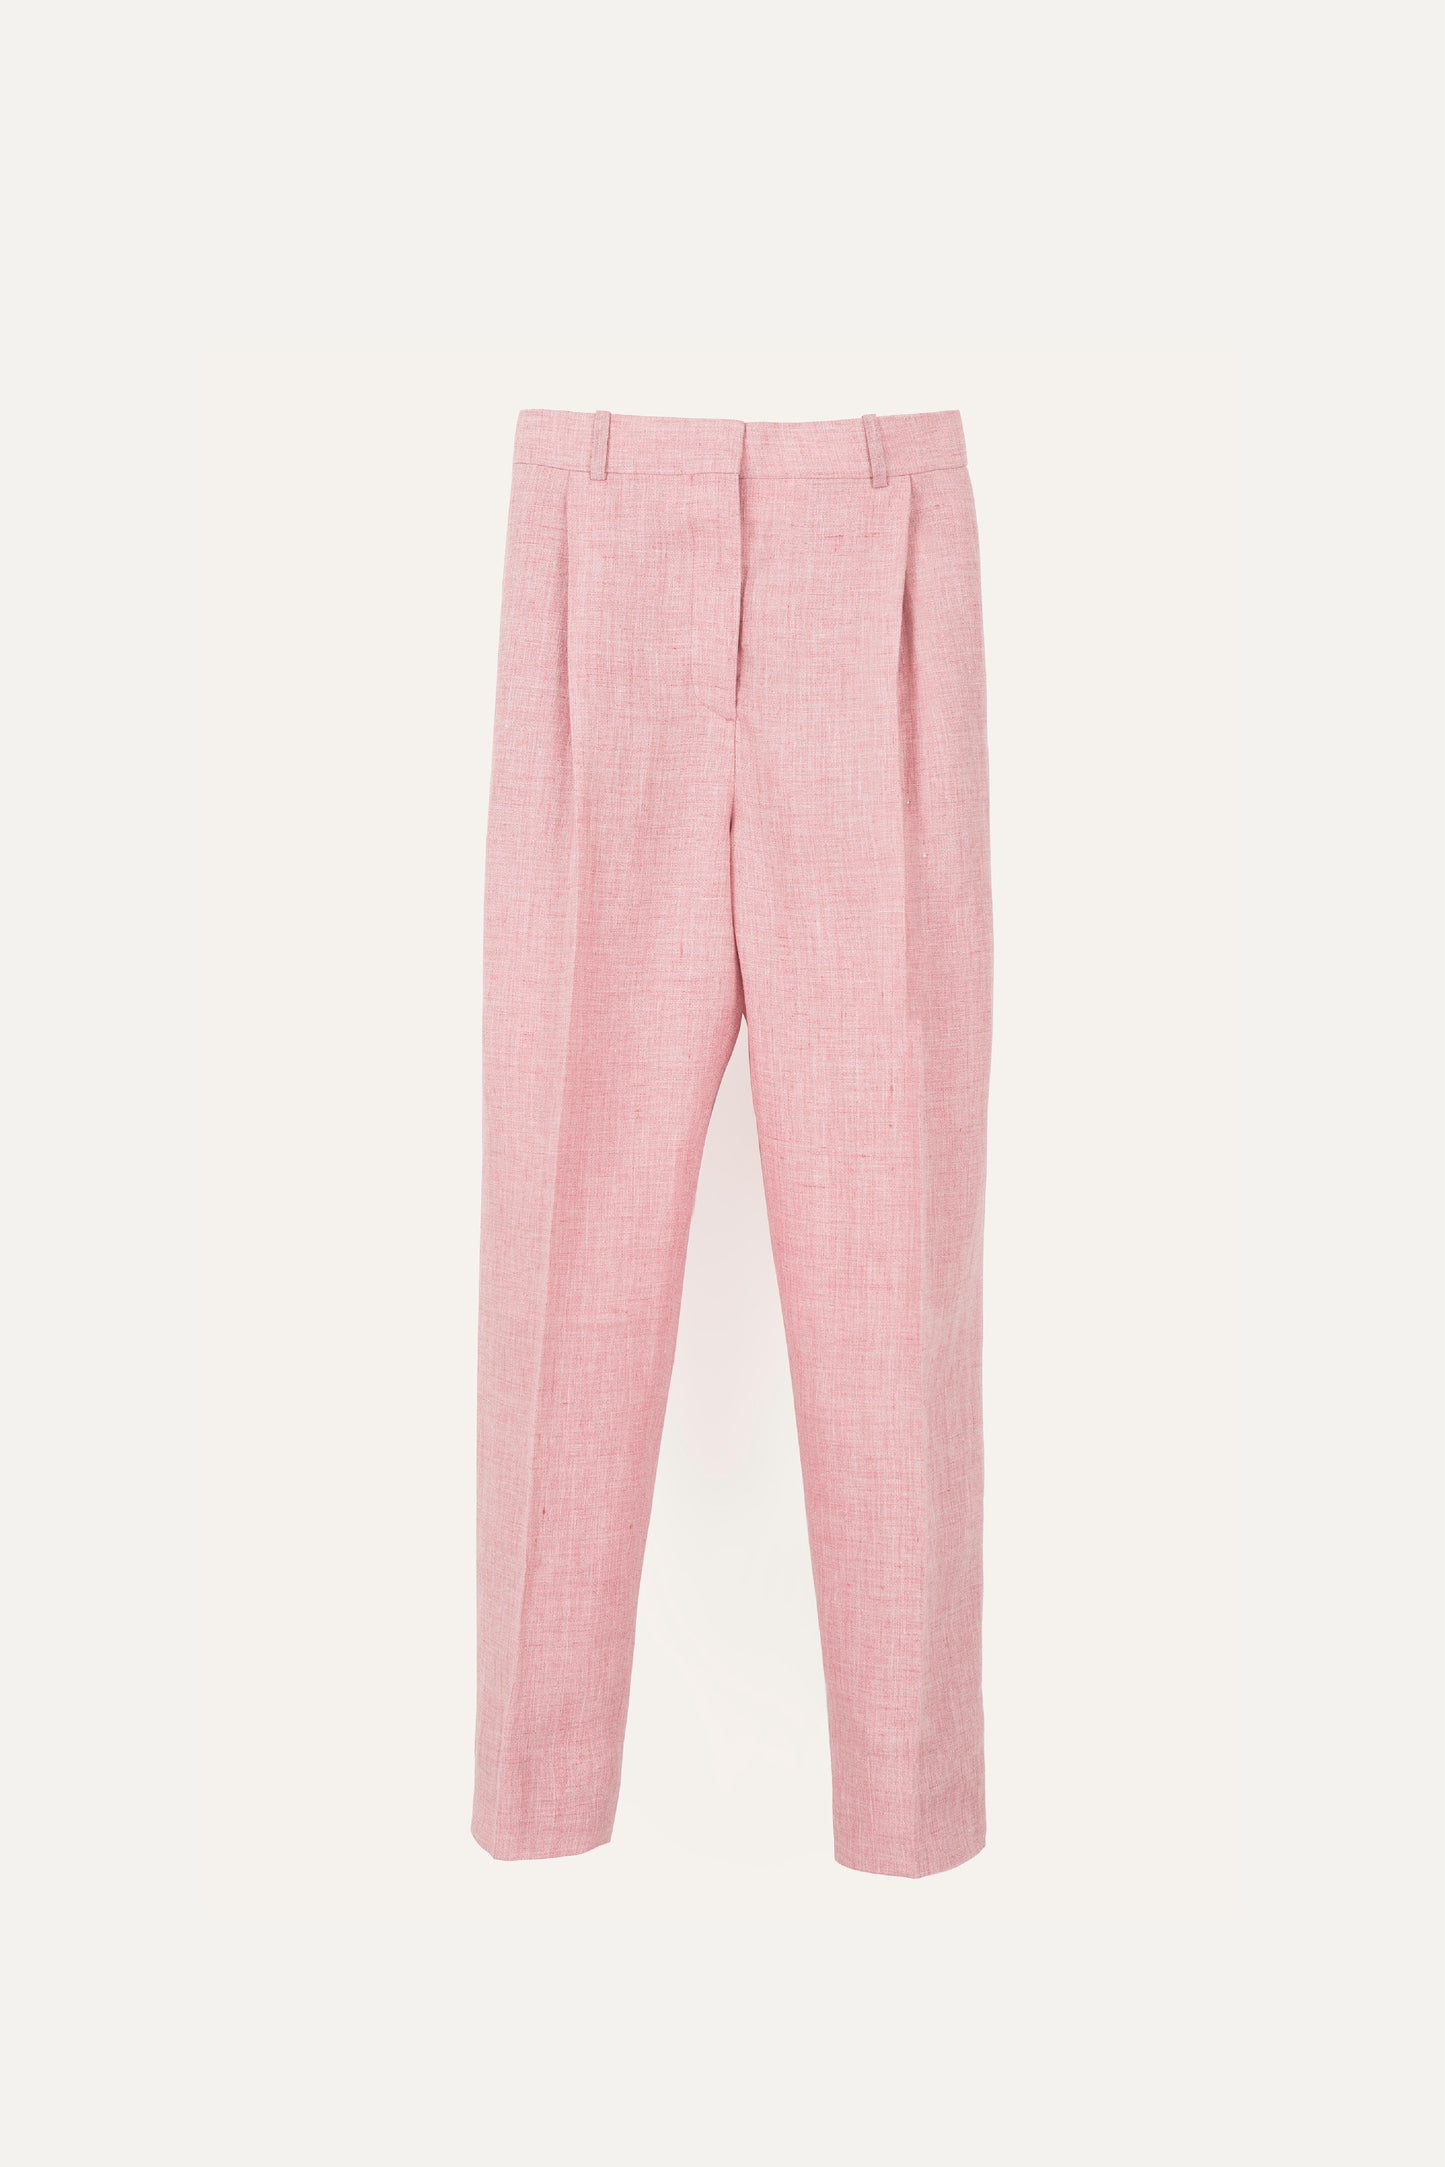 Roman Light Pink Linen Pants : Made To Measure Custom Jeans For